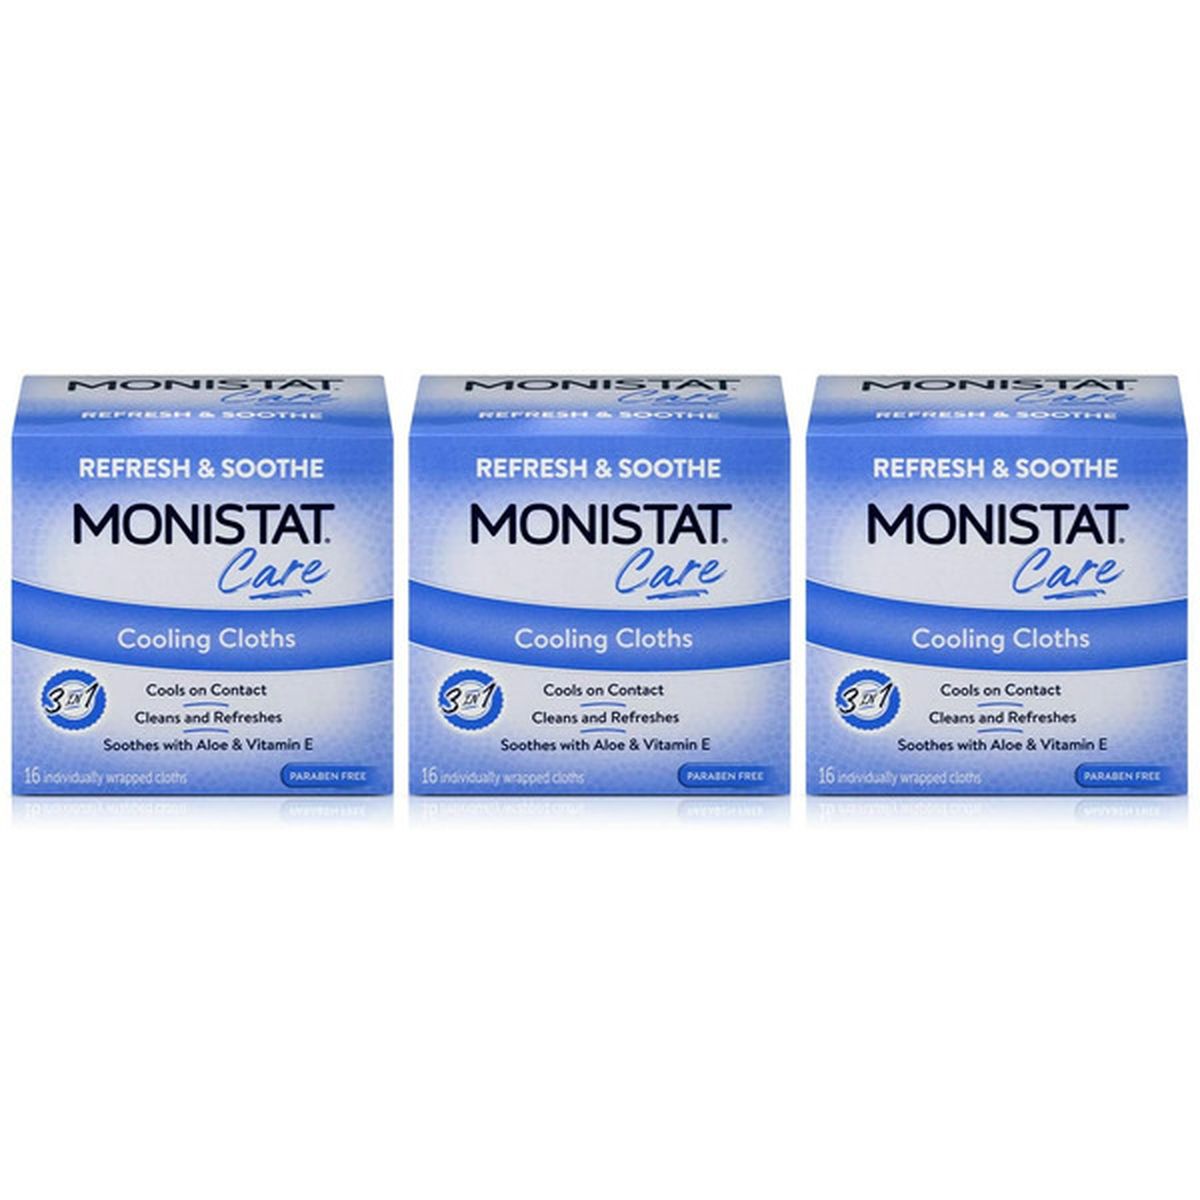 MONISTAT Feminine Cloths (16 ct) Delivery or Pickup Near Me - Instacart